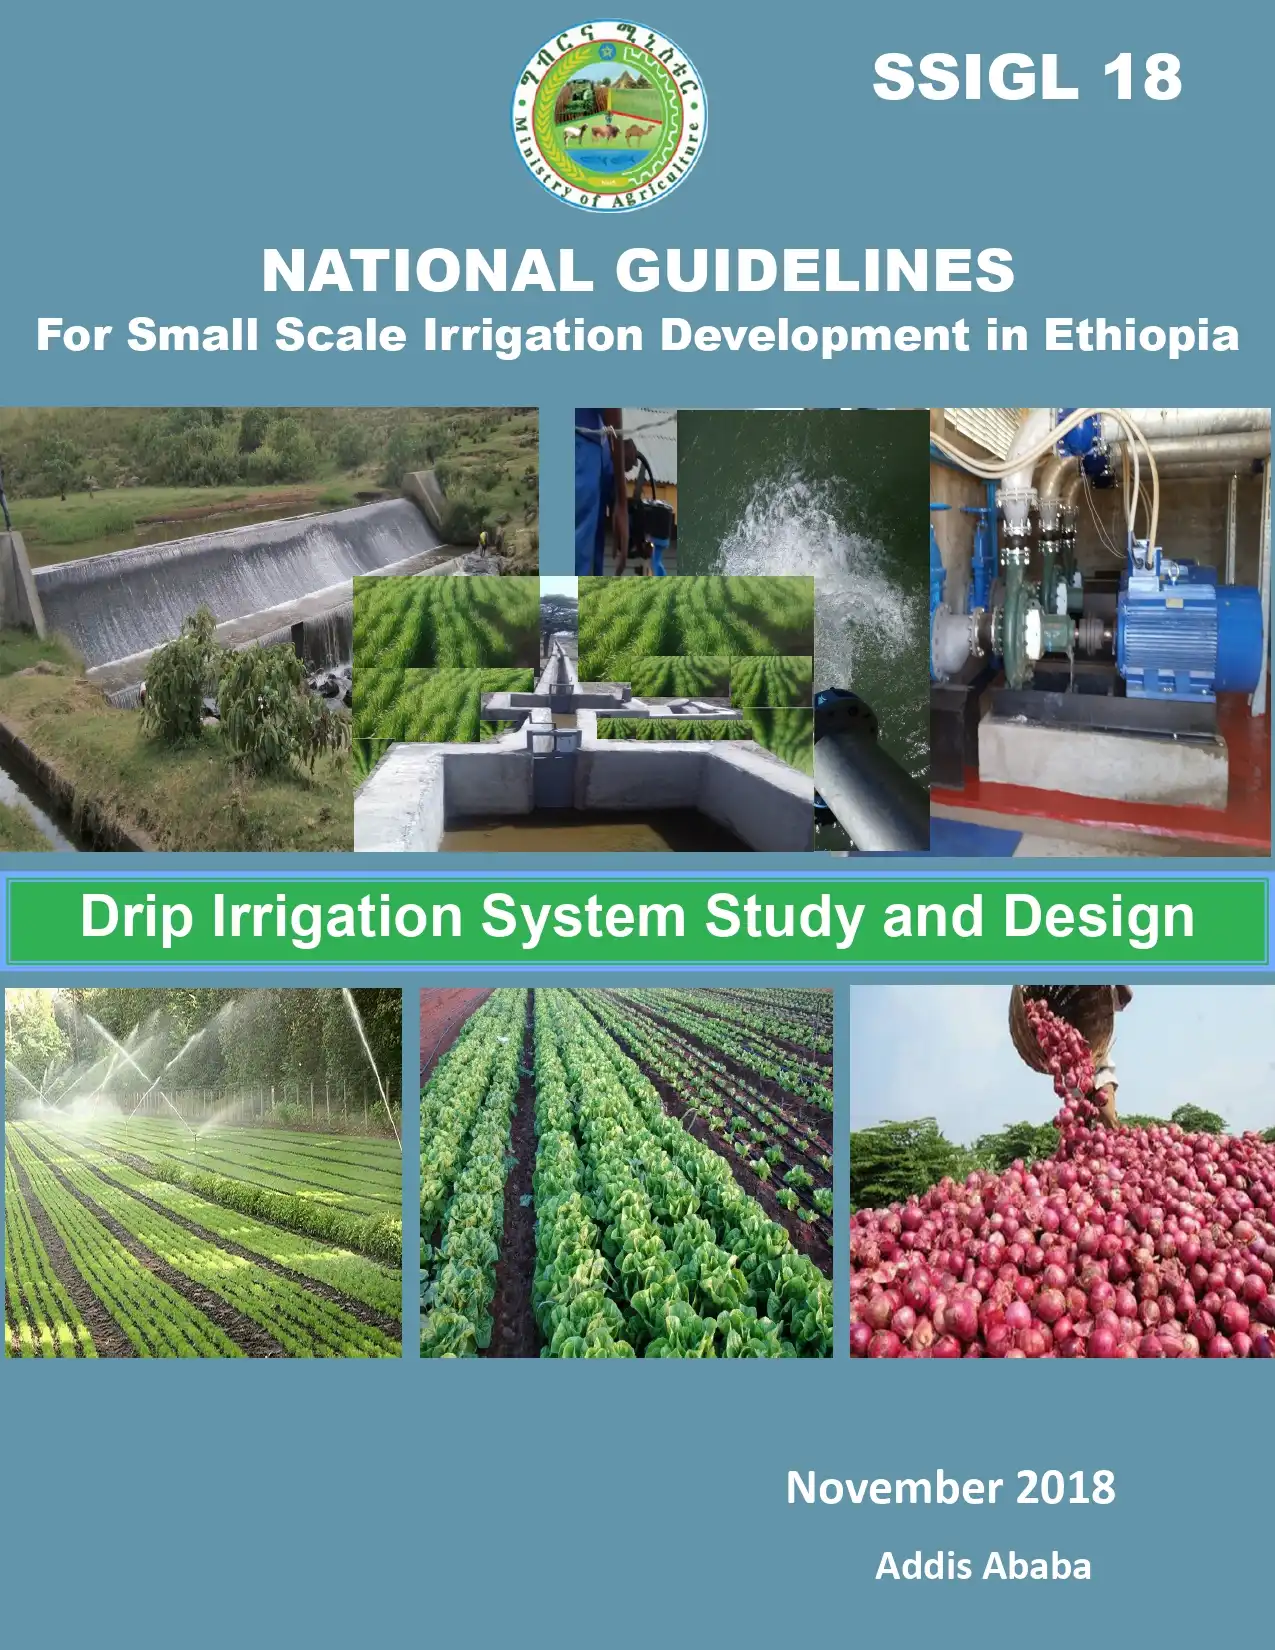 National Guidelines For Small Scale Irrigation Development in Ethiopia